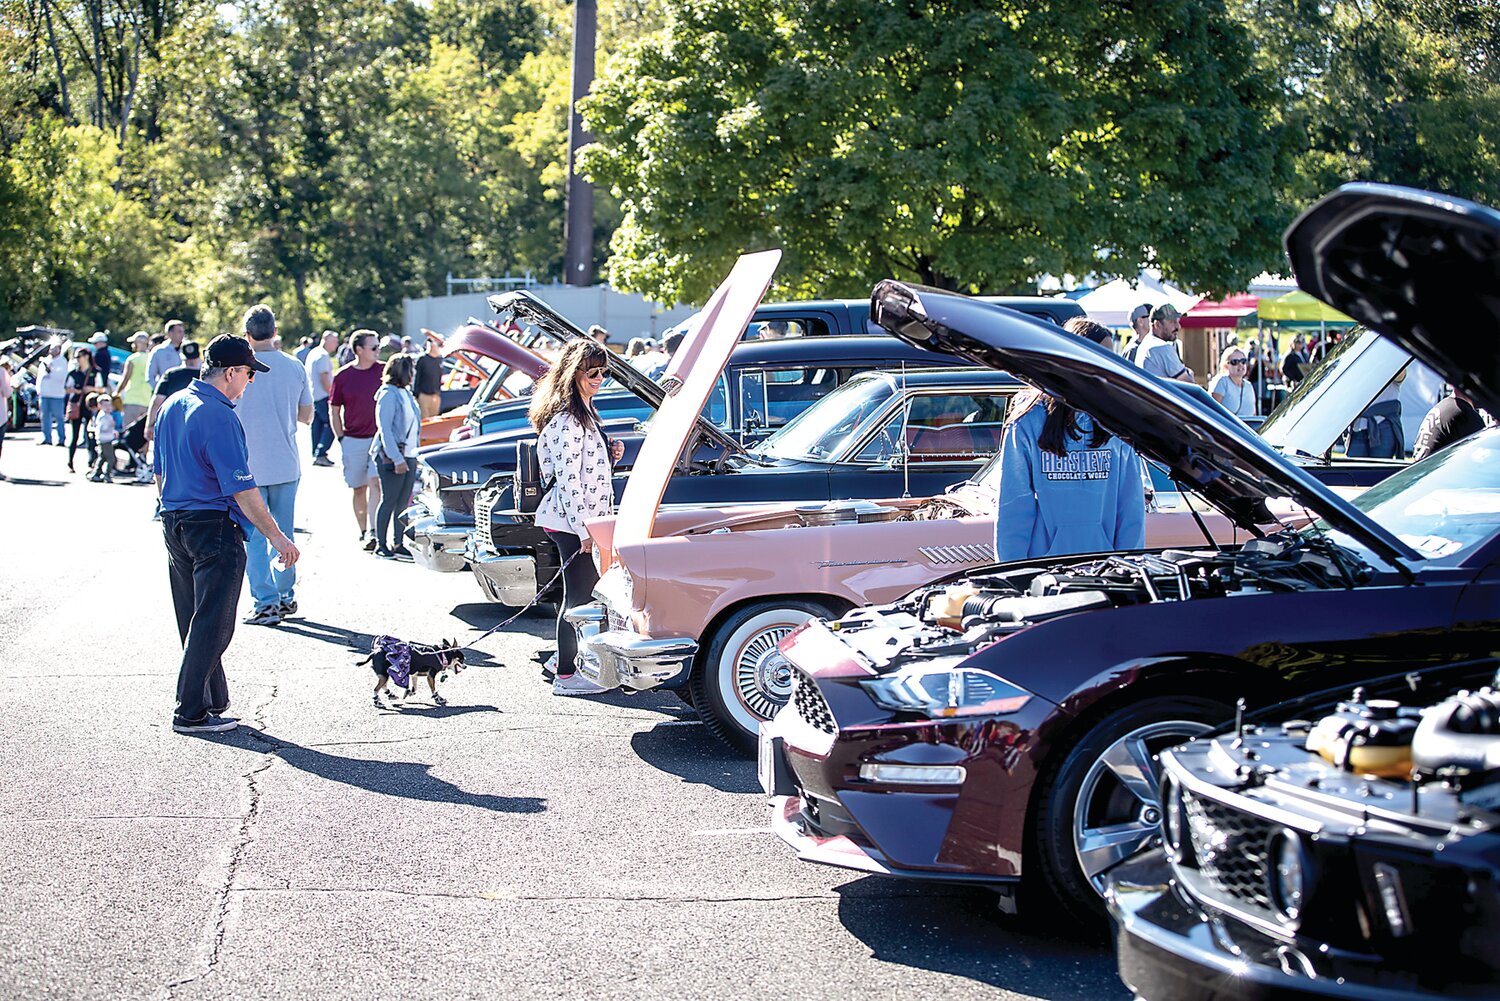 The Car Show for Autism, hosted by Potential, will raise funds to furnish Potential’s Springtime School.